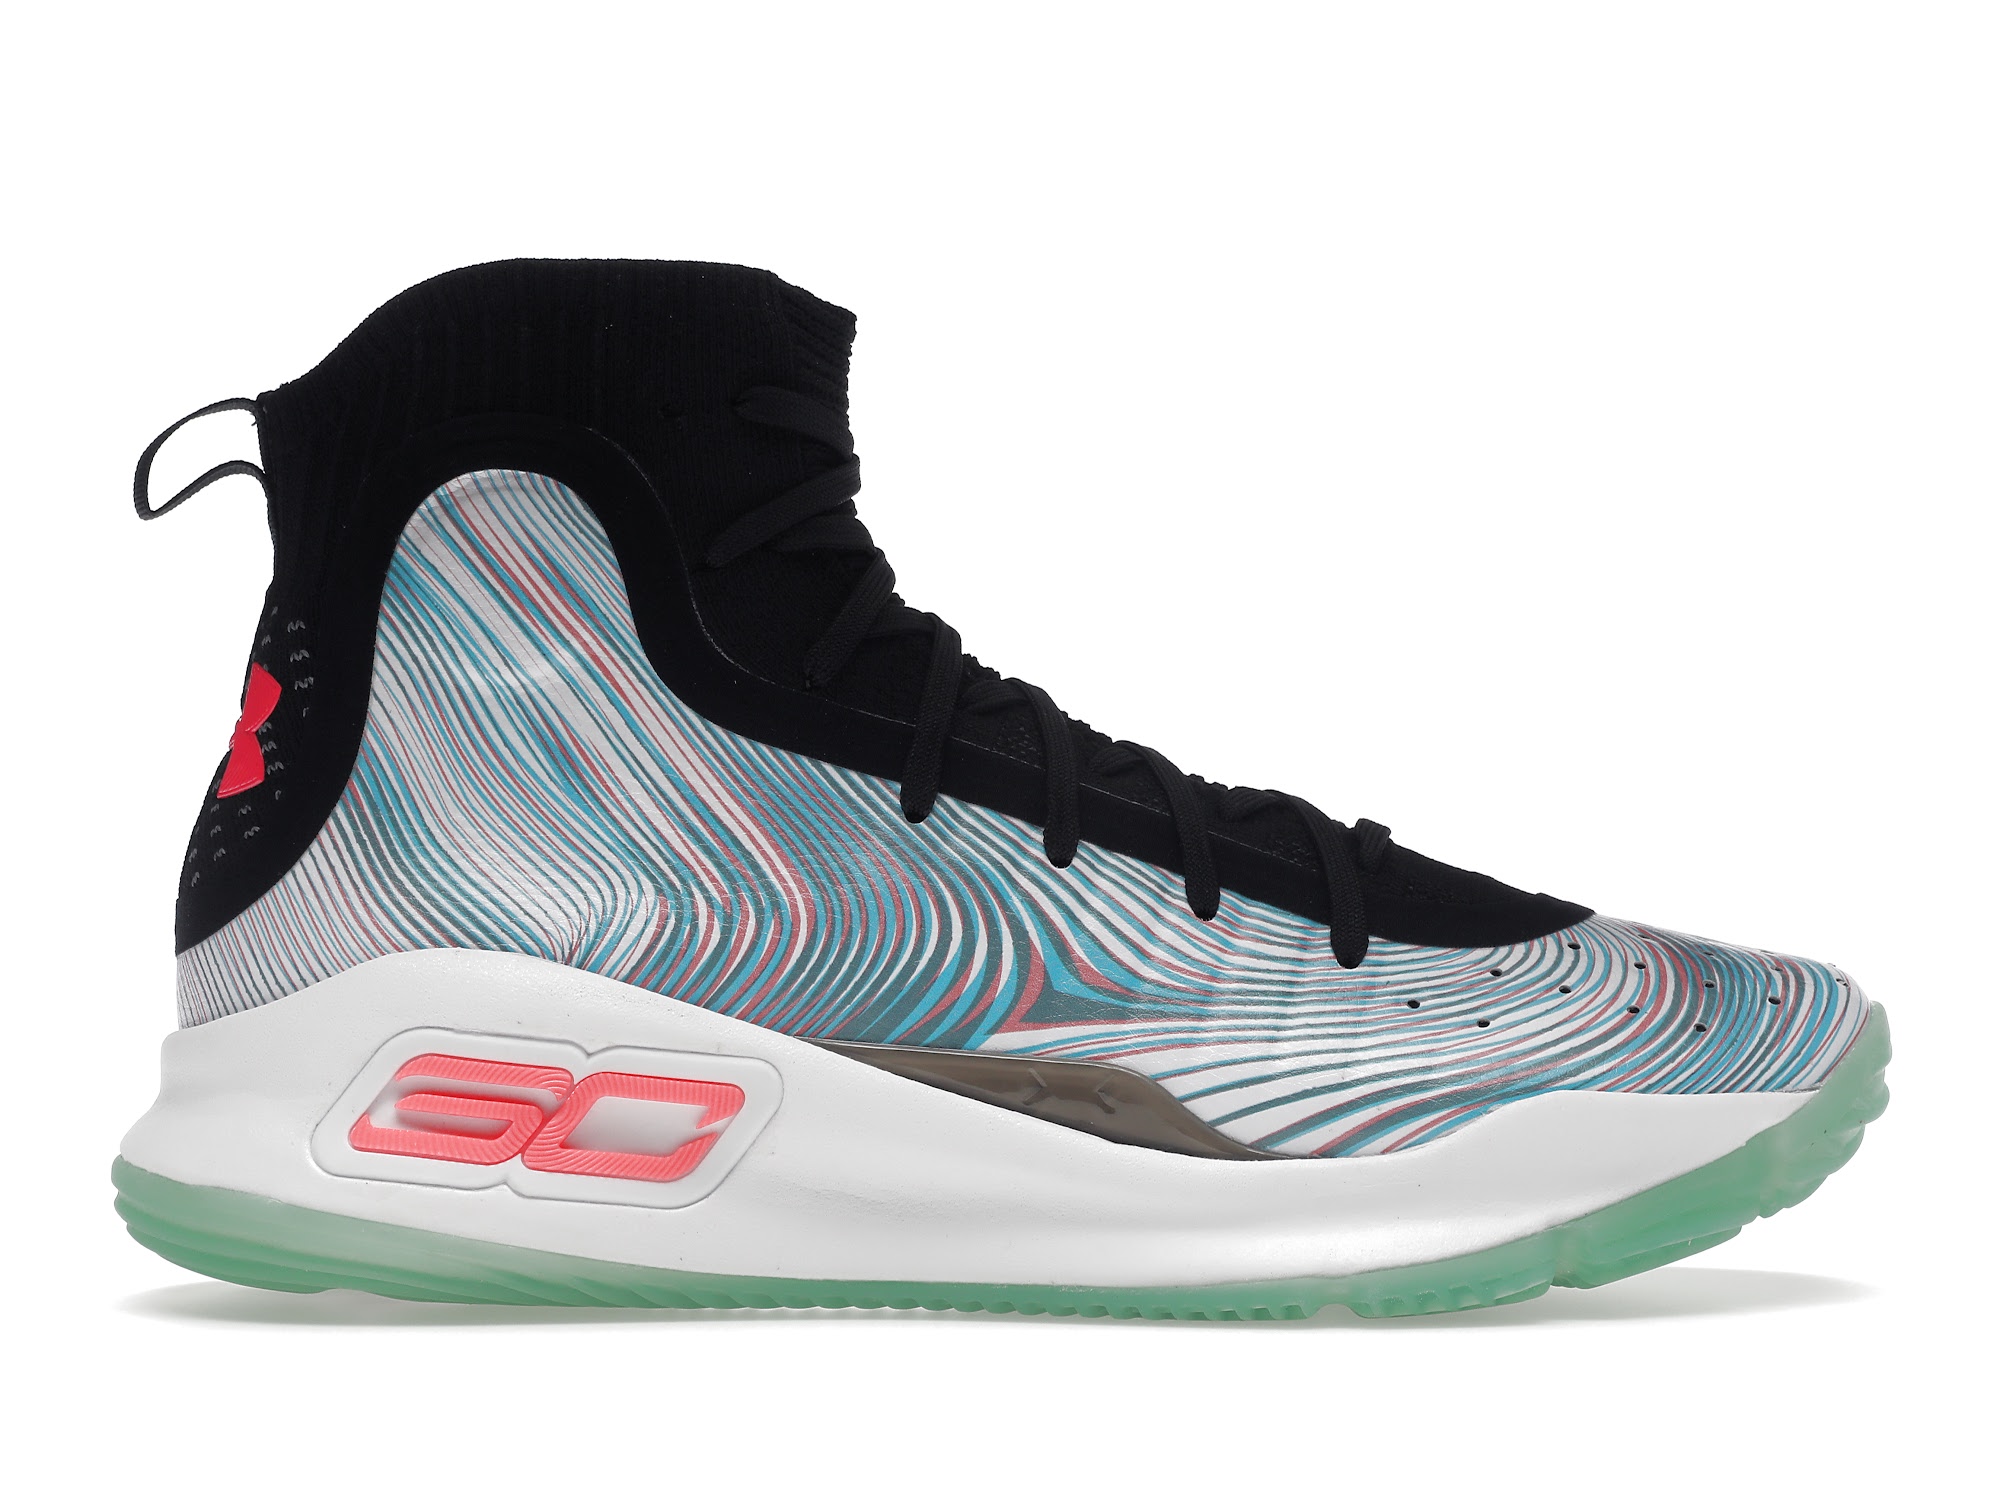 Under Armour Curry 4 More Magic メンズ - 1298306 016 - JP